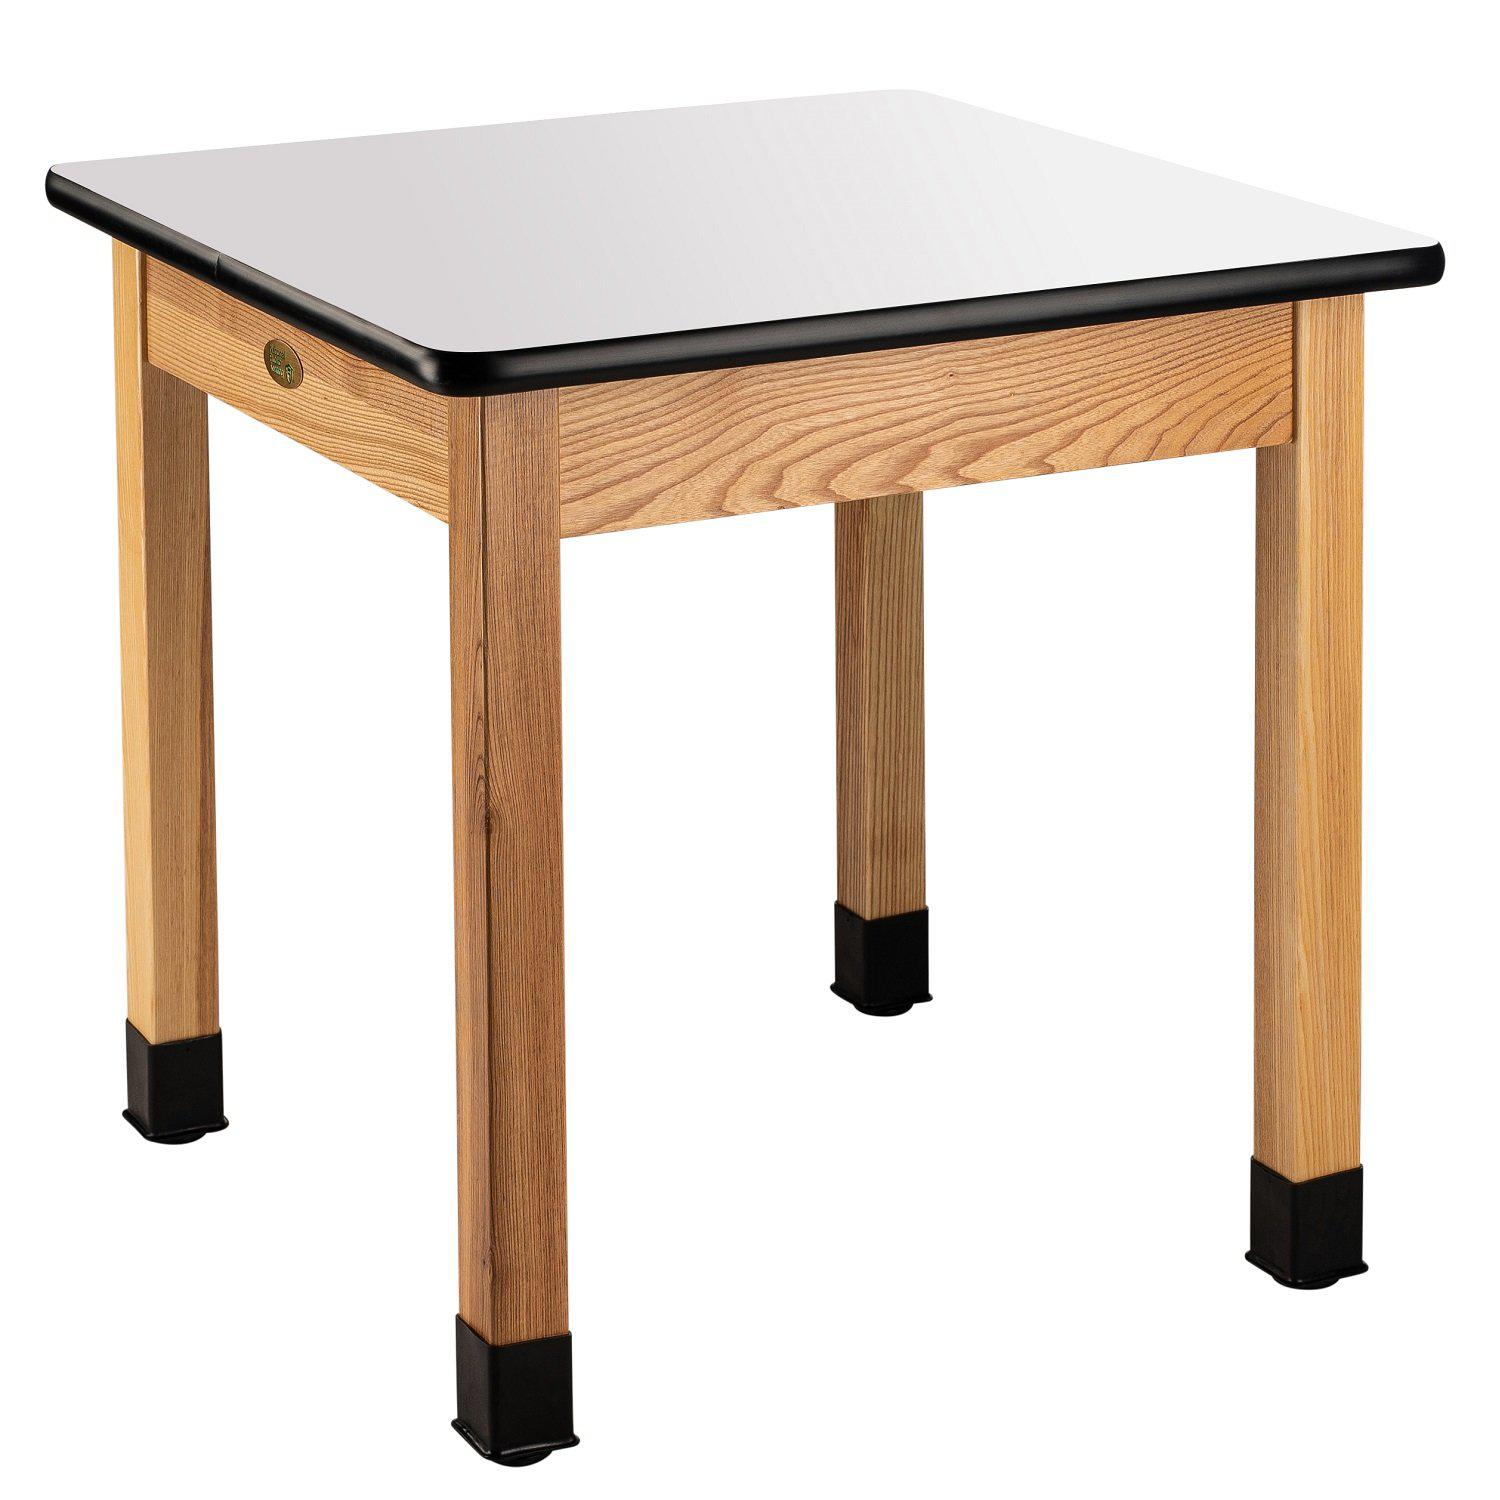 Personal Science Lab Table, Wood Frame, 30"x30"x36" H, Whiteboard Top